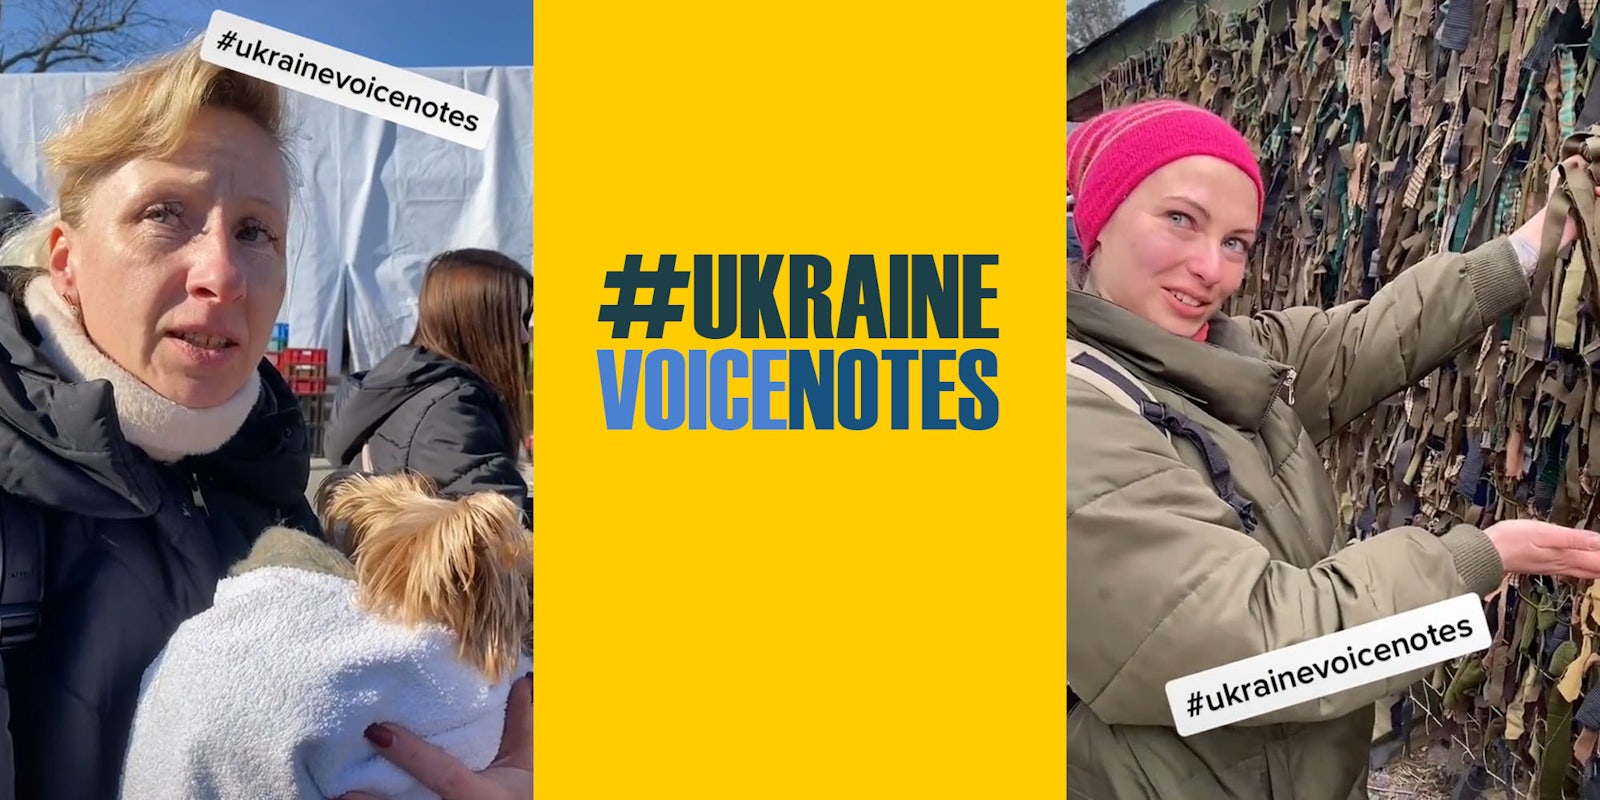 Woman holding dog telling her story caption '#ukrainevoicenotes' (l) Yellow background with caption '#ukrainevoicenotes' (c) Woman holding cloth up caption '#ukrainevoicenotes' (r)